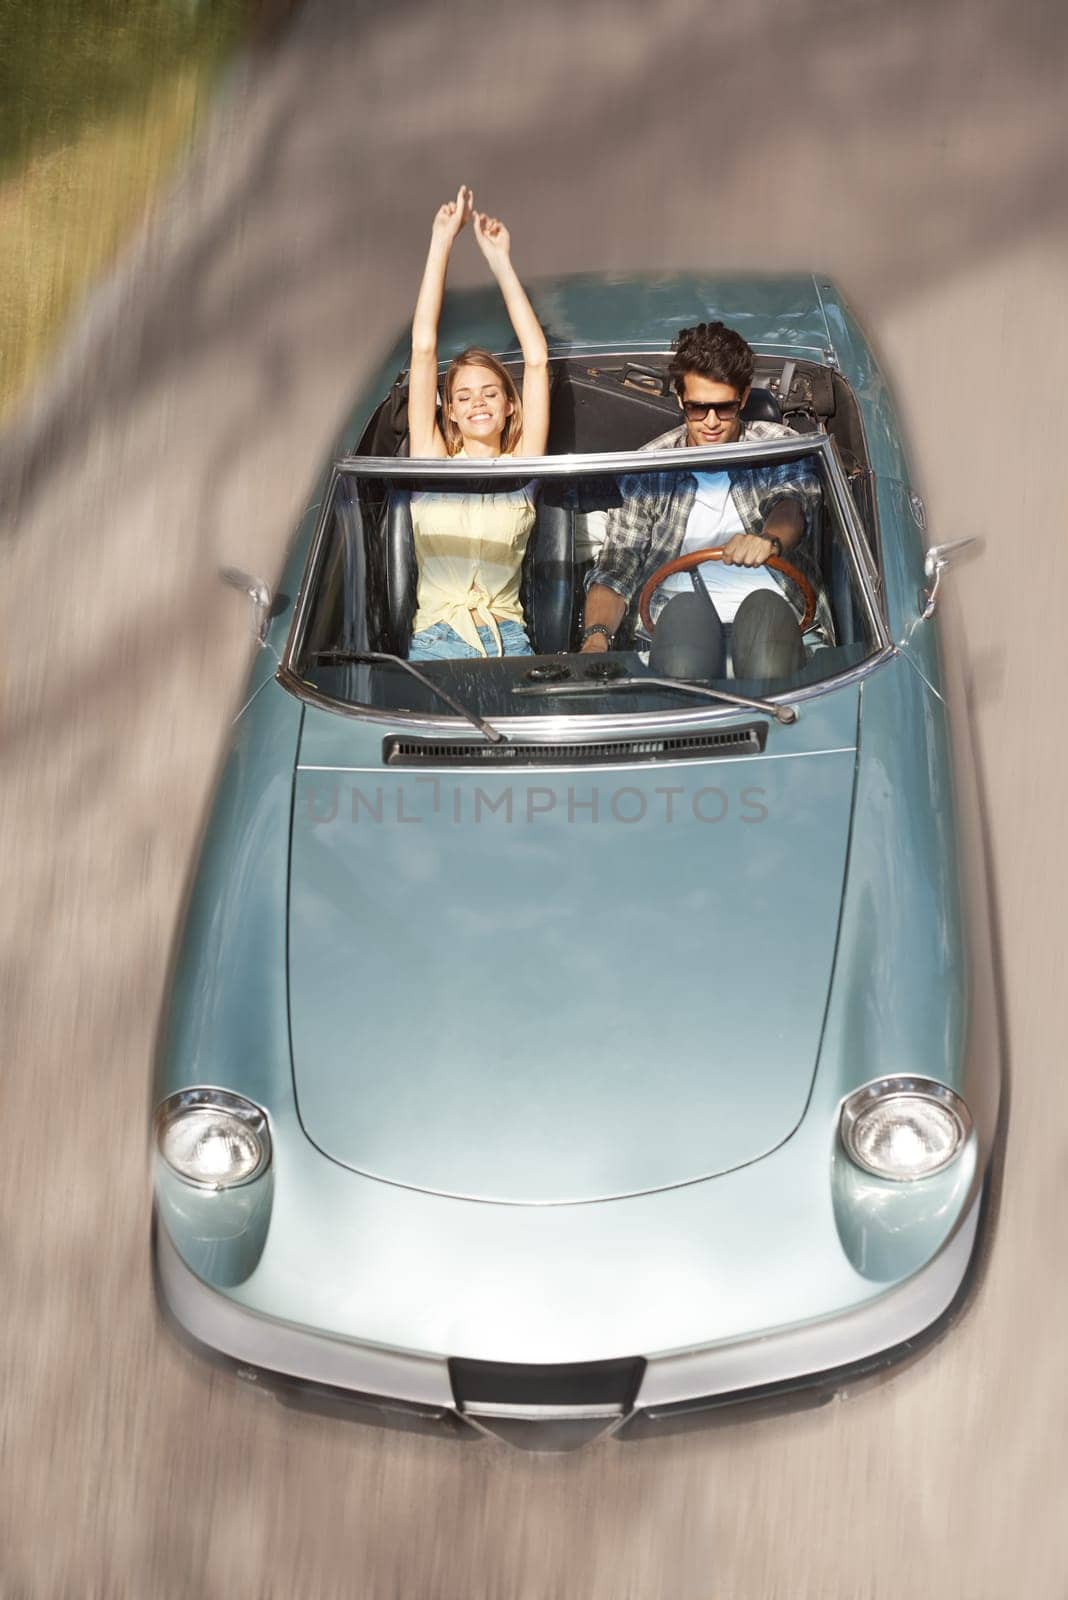 Feeling the rushing air. High angle shot of a young woman with her arms raised while riding in a convertible with her boyfriend